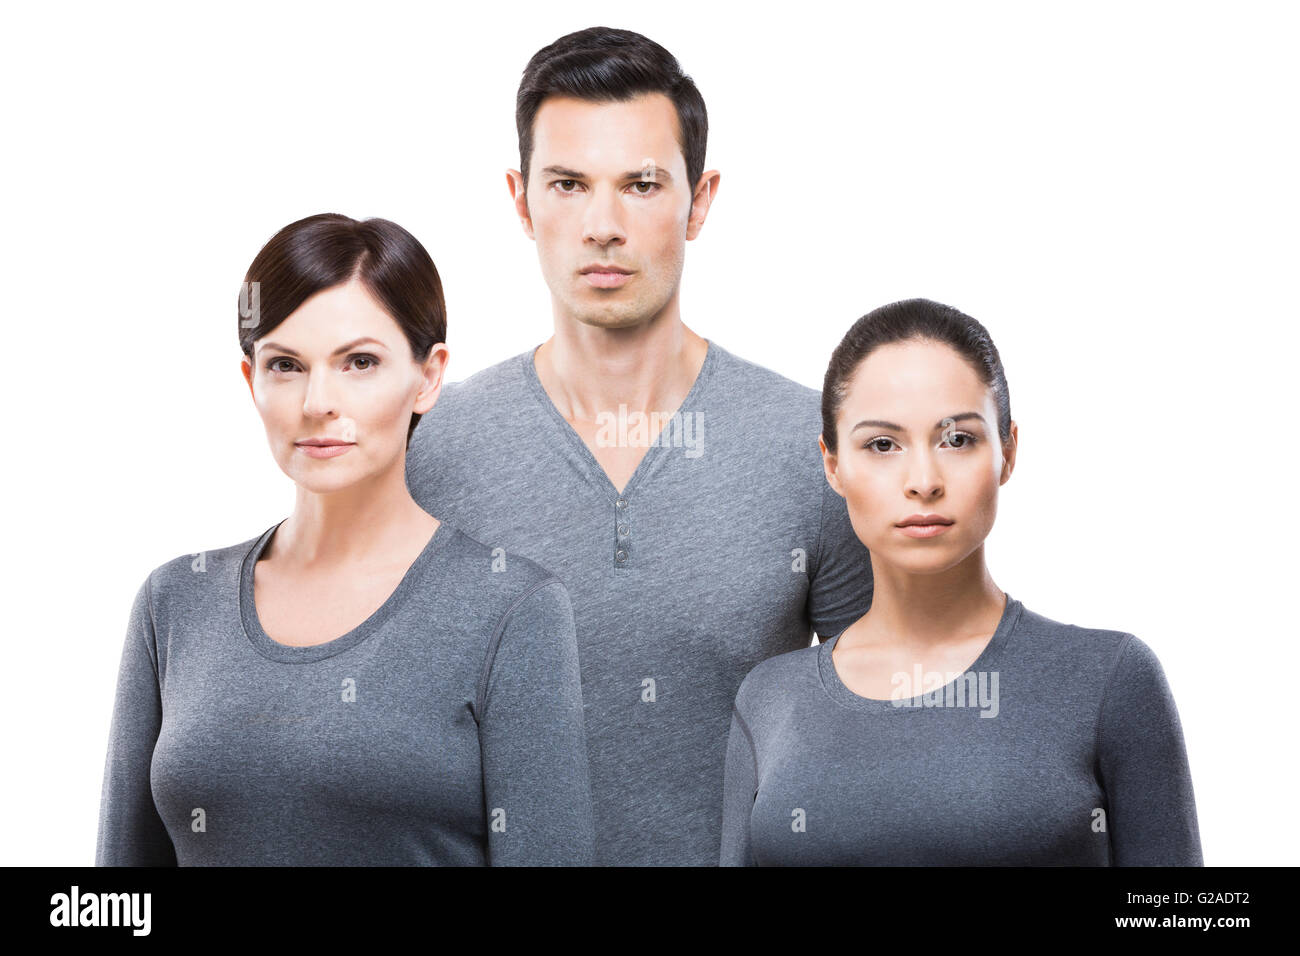 Man and two women wearing grey tops Stock Photo